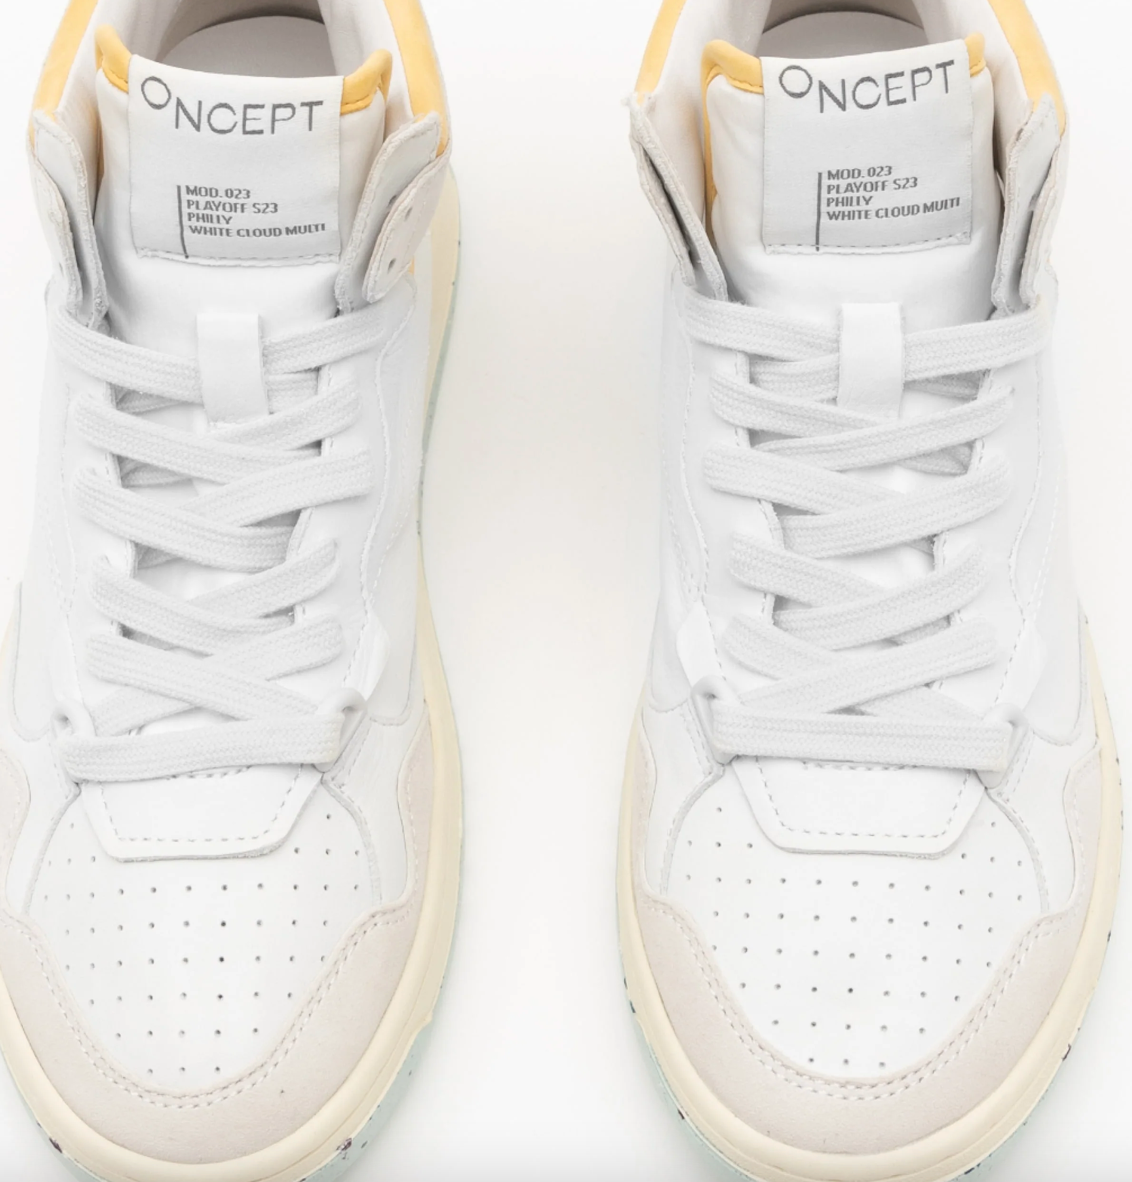 Oncept-Philly Midtop Sneaker-White Cloud